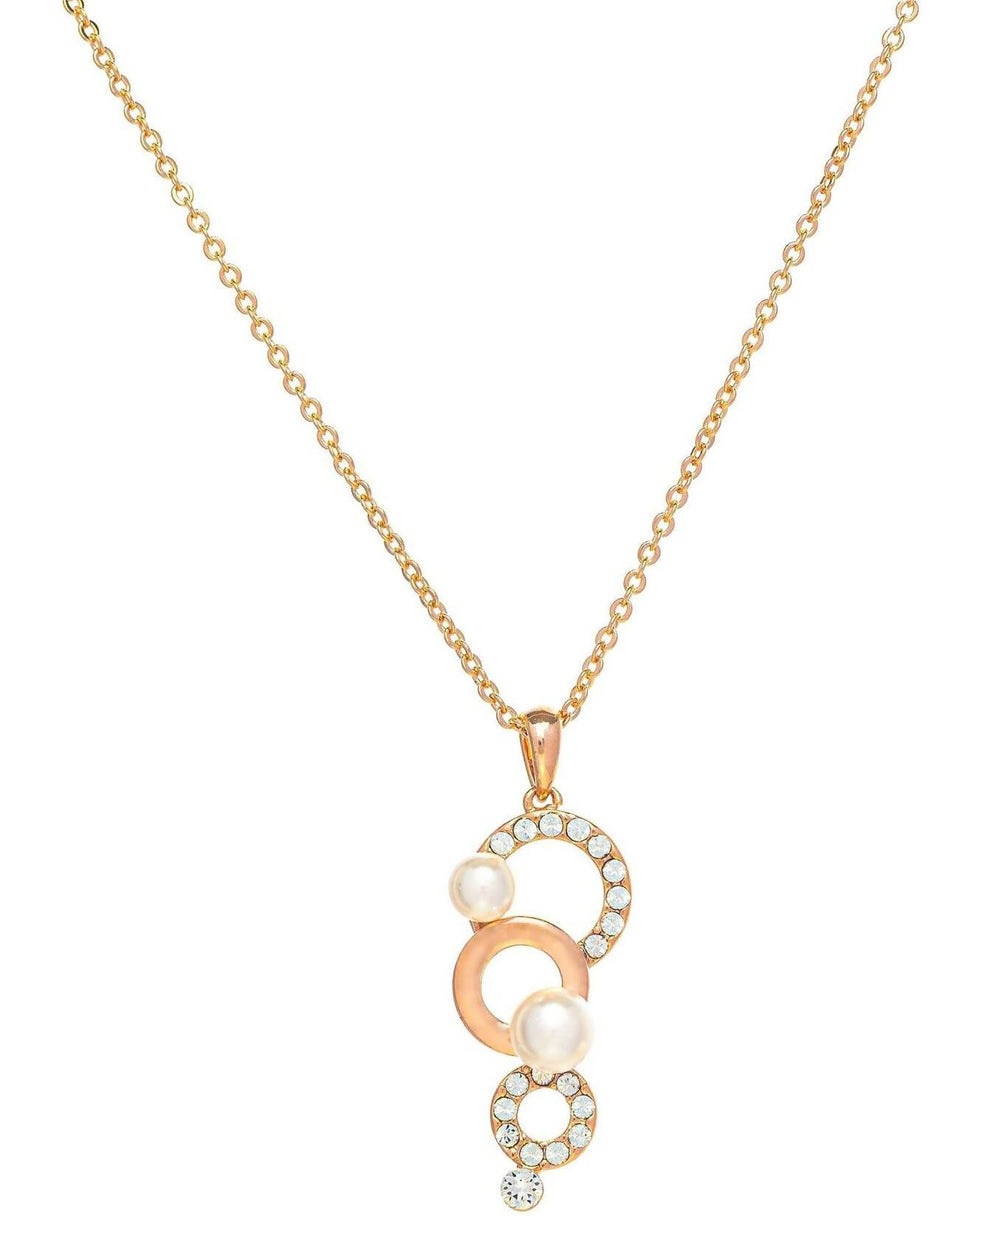 Aurora- An Elegant Pendant featuring both Crystals & Pearls made with Swarovski Elements Pendants Forest Jewelry Rose Gold Plating 